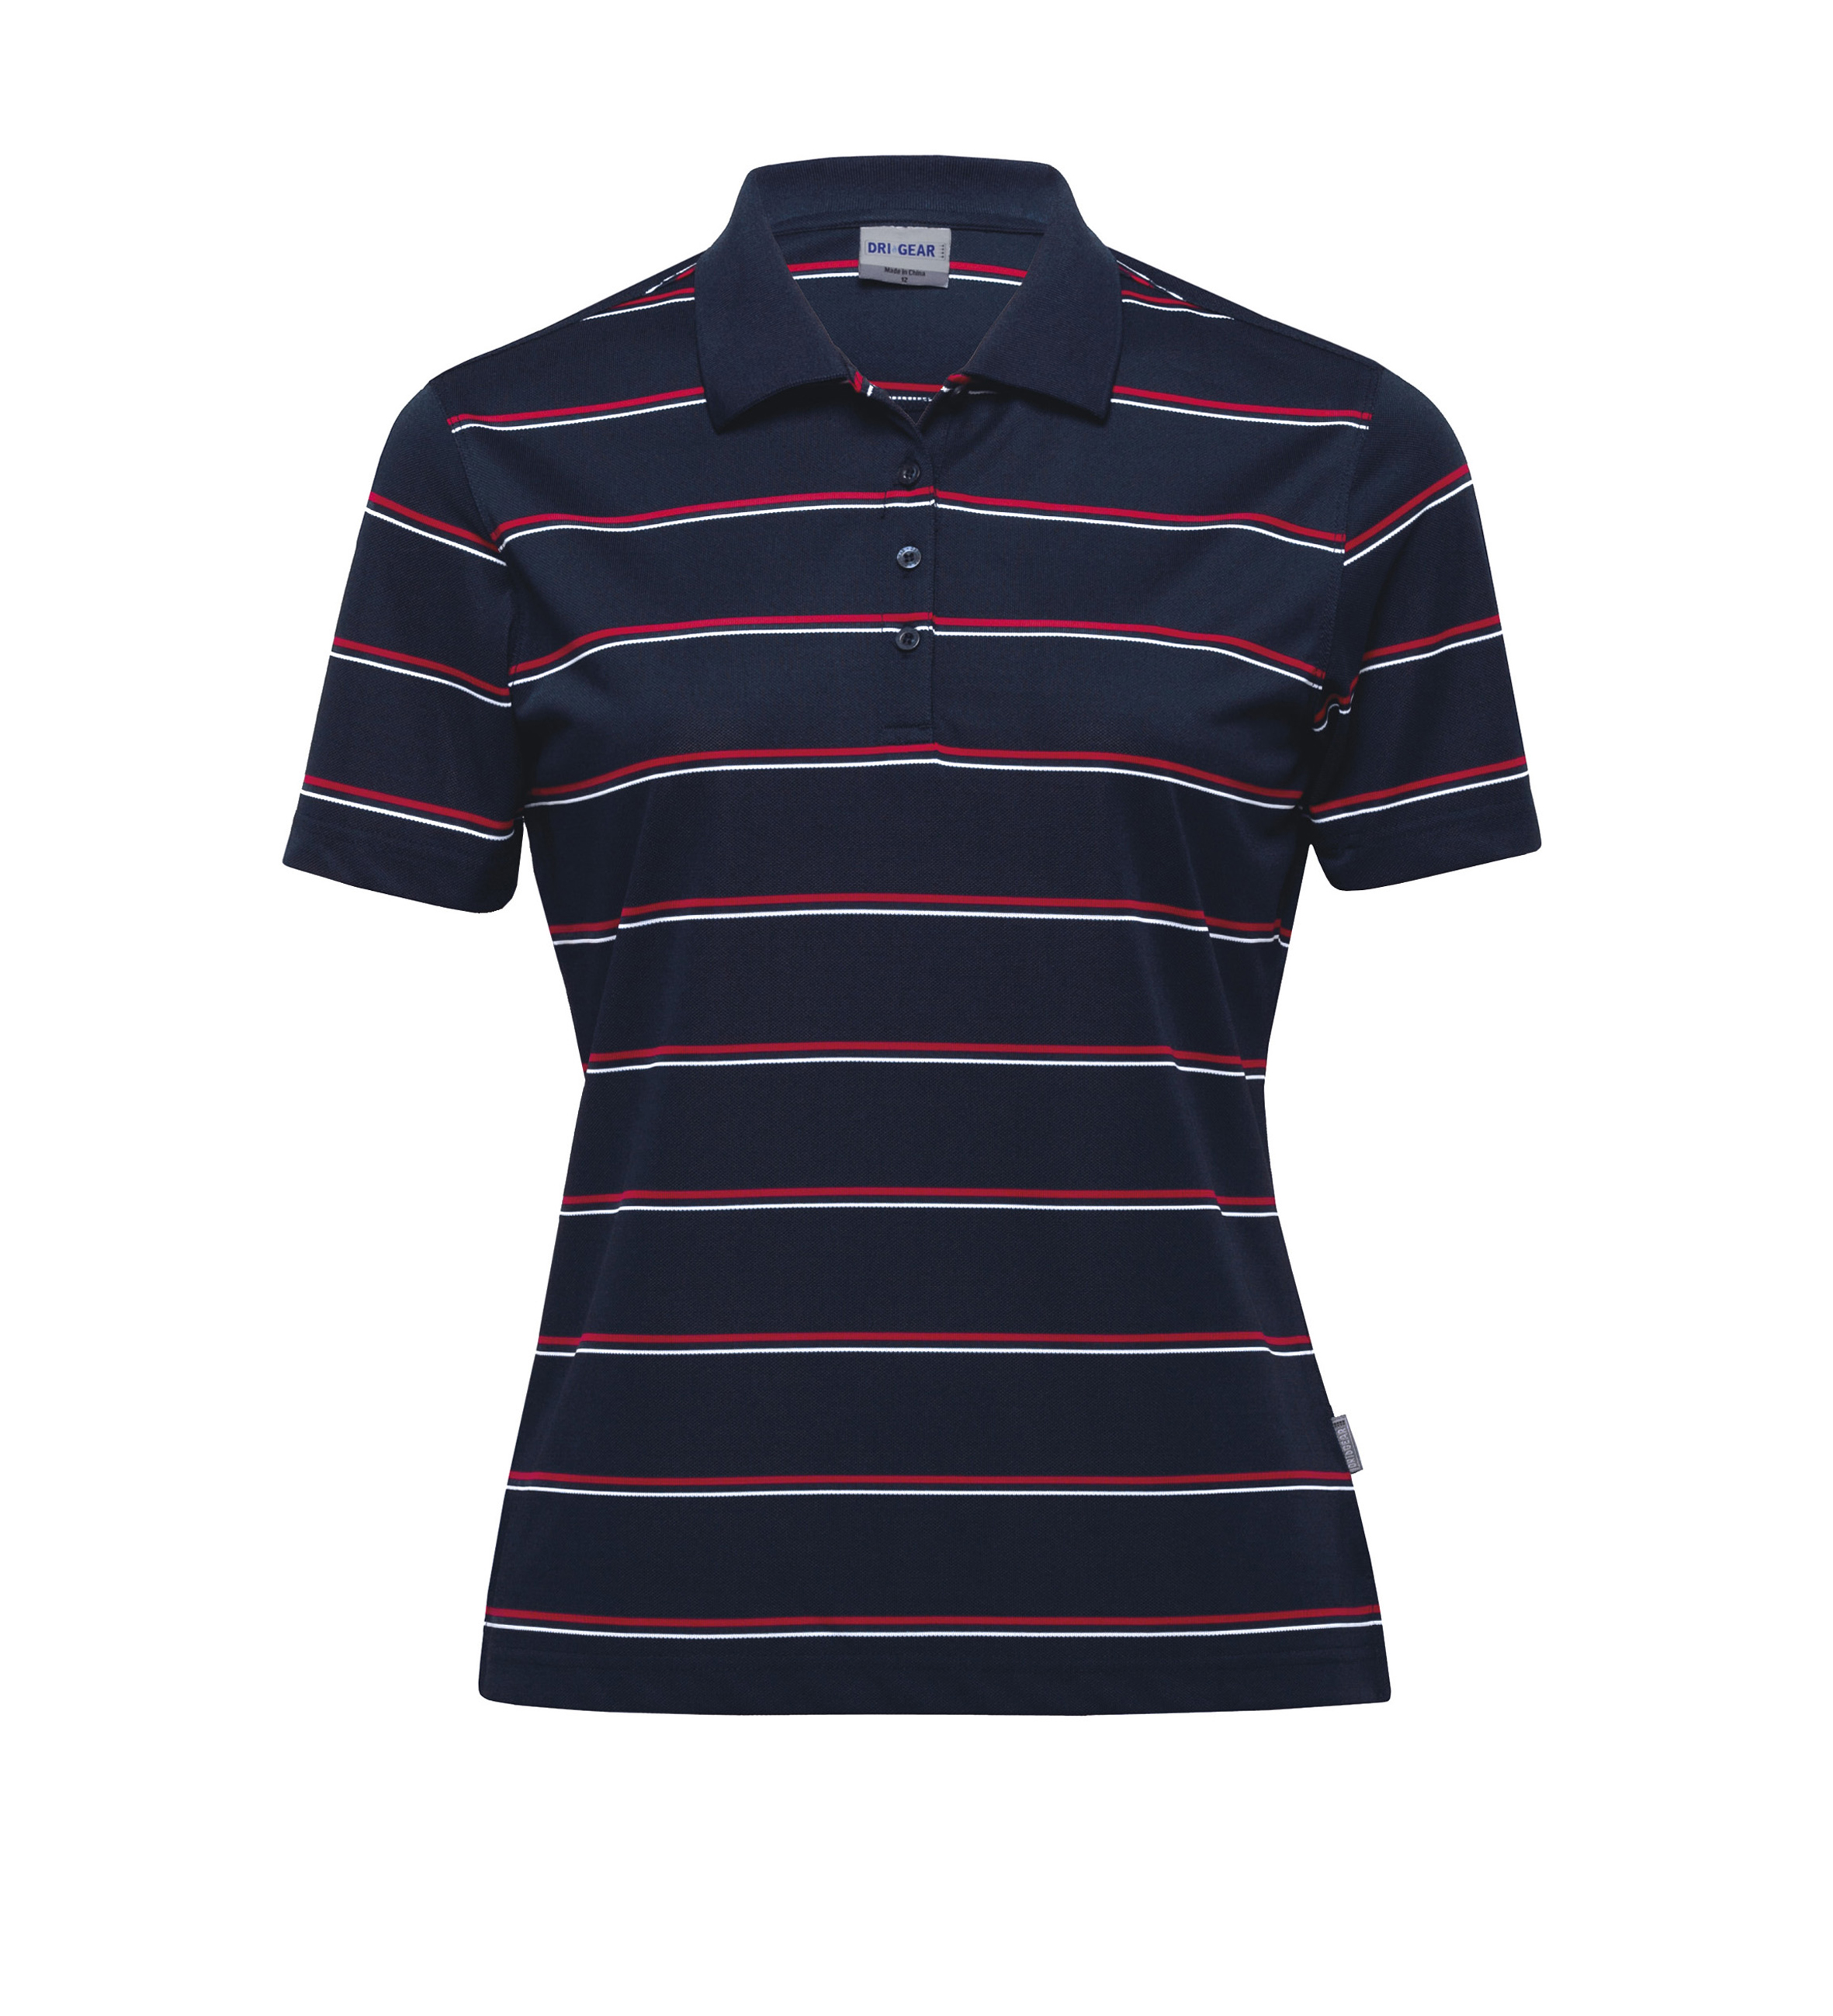 Dri Gear Kinetic Polo - WDGKP - Navy/Red/White